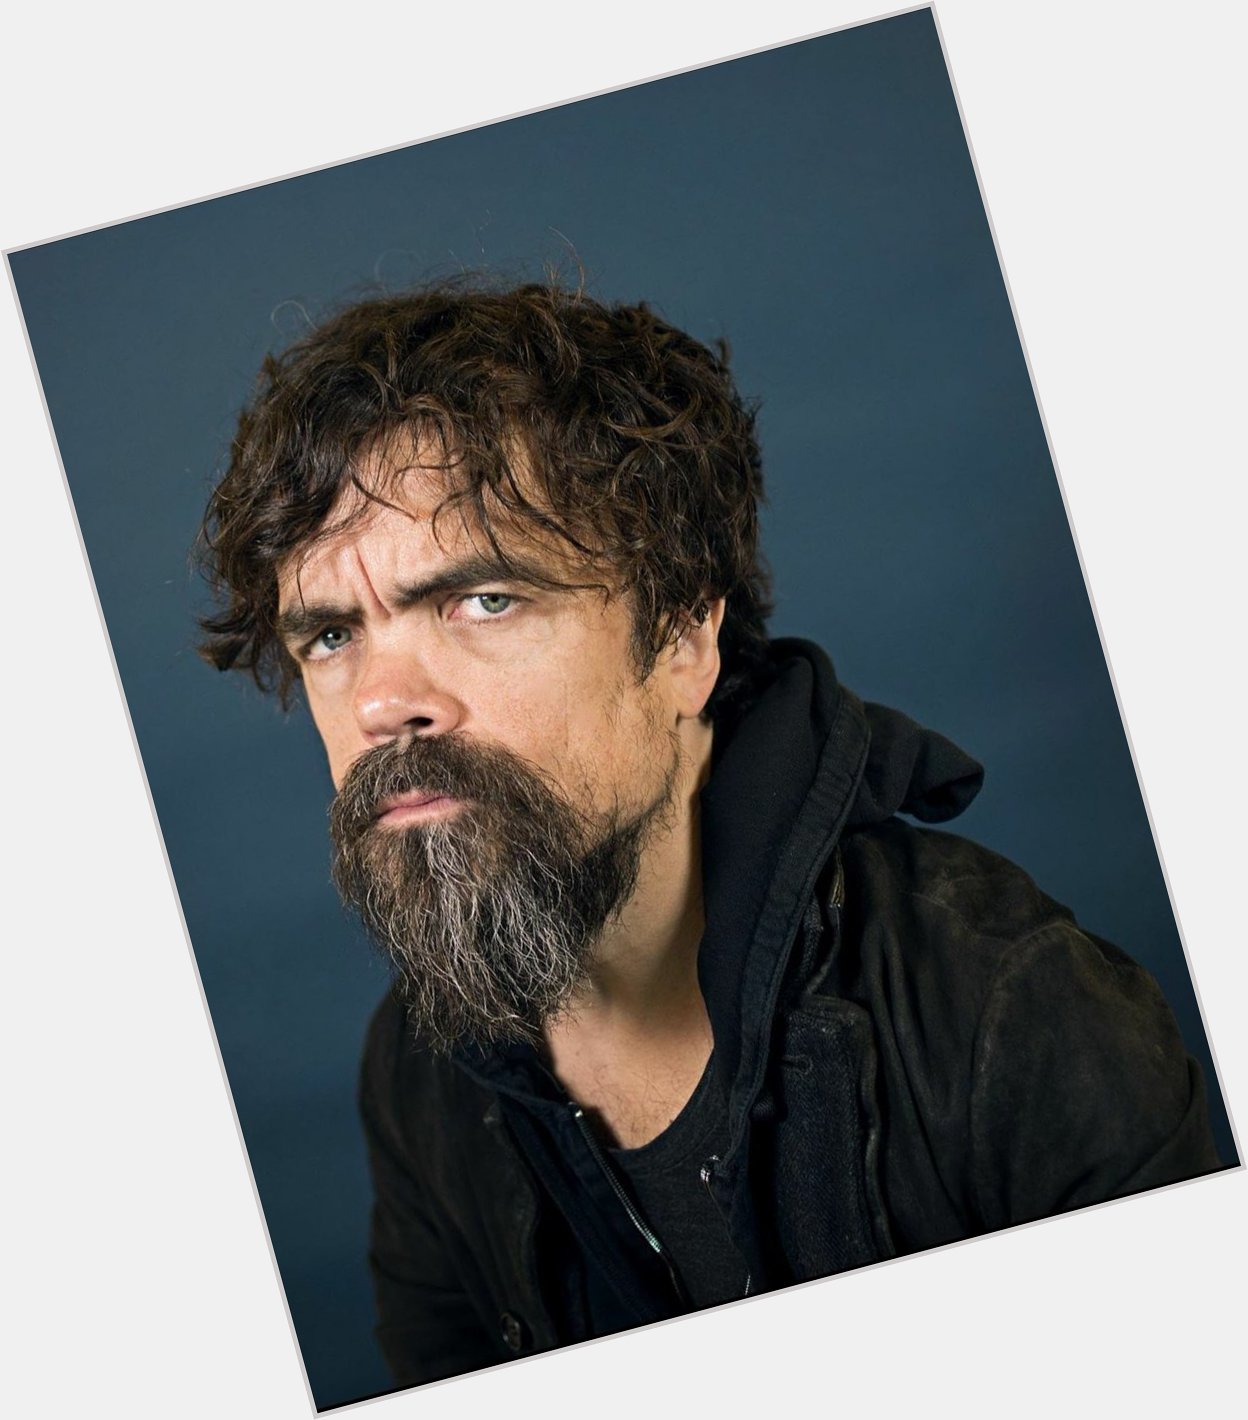 Happy Birthday Peter Dinklage
Tyrion Lannister
I love you  3000times 